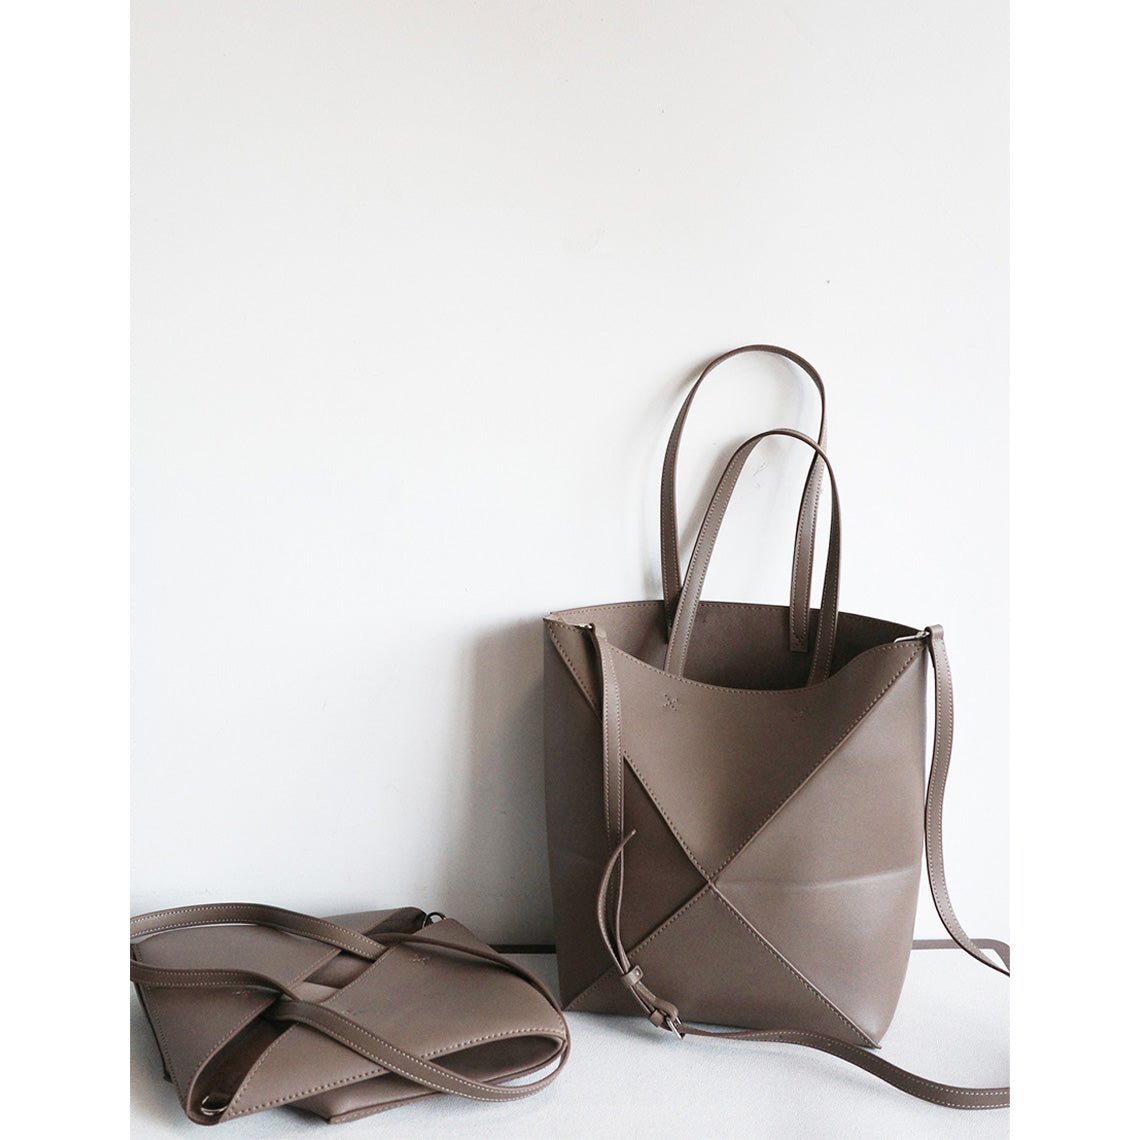 New Puzzle Fold Tote Bag Taupe | DIY Handmade Luxury Bags - POPSEWING®